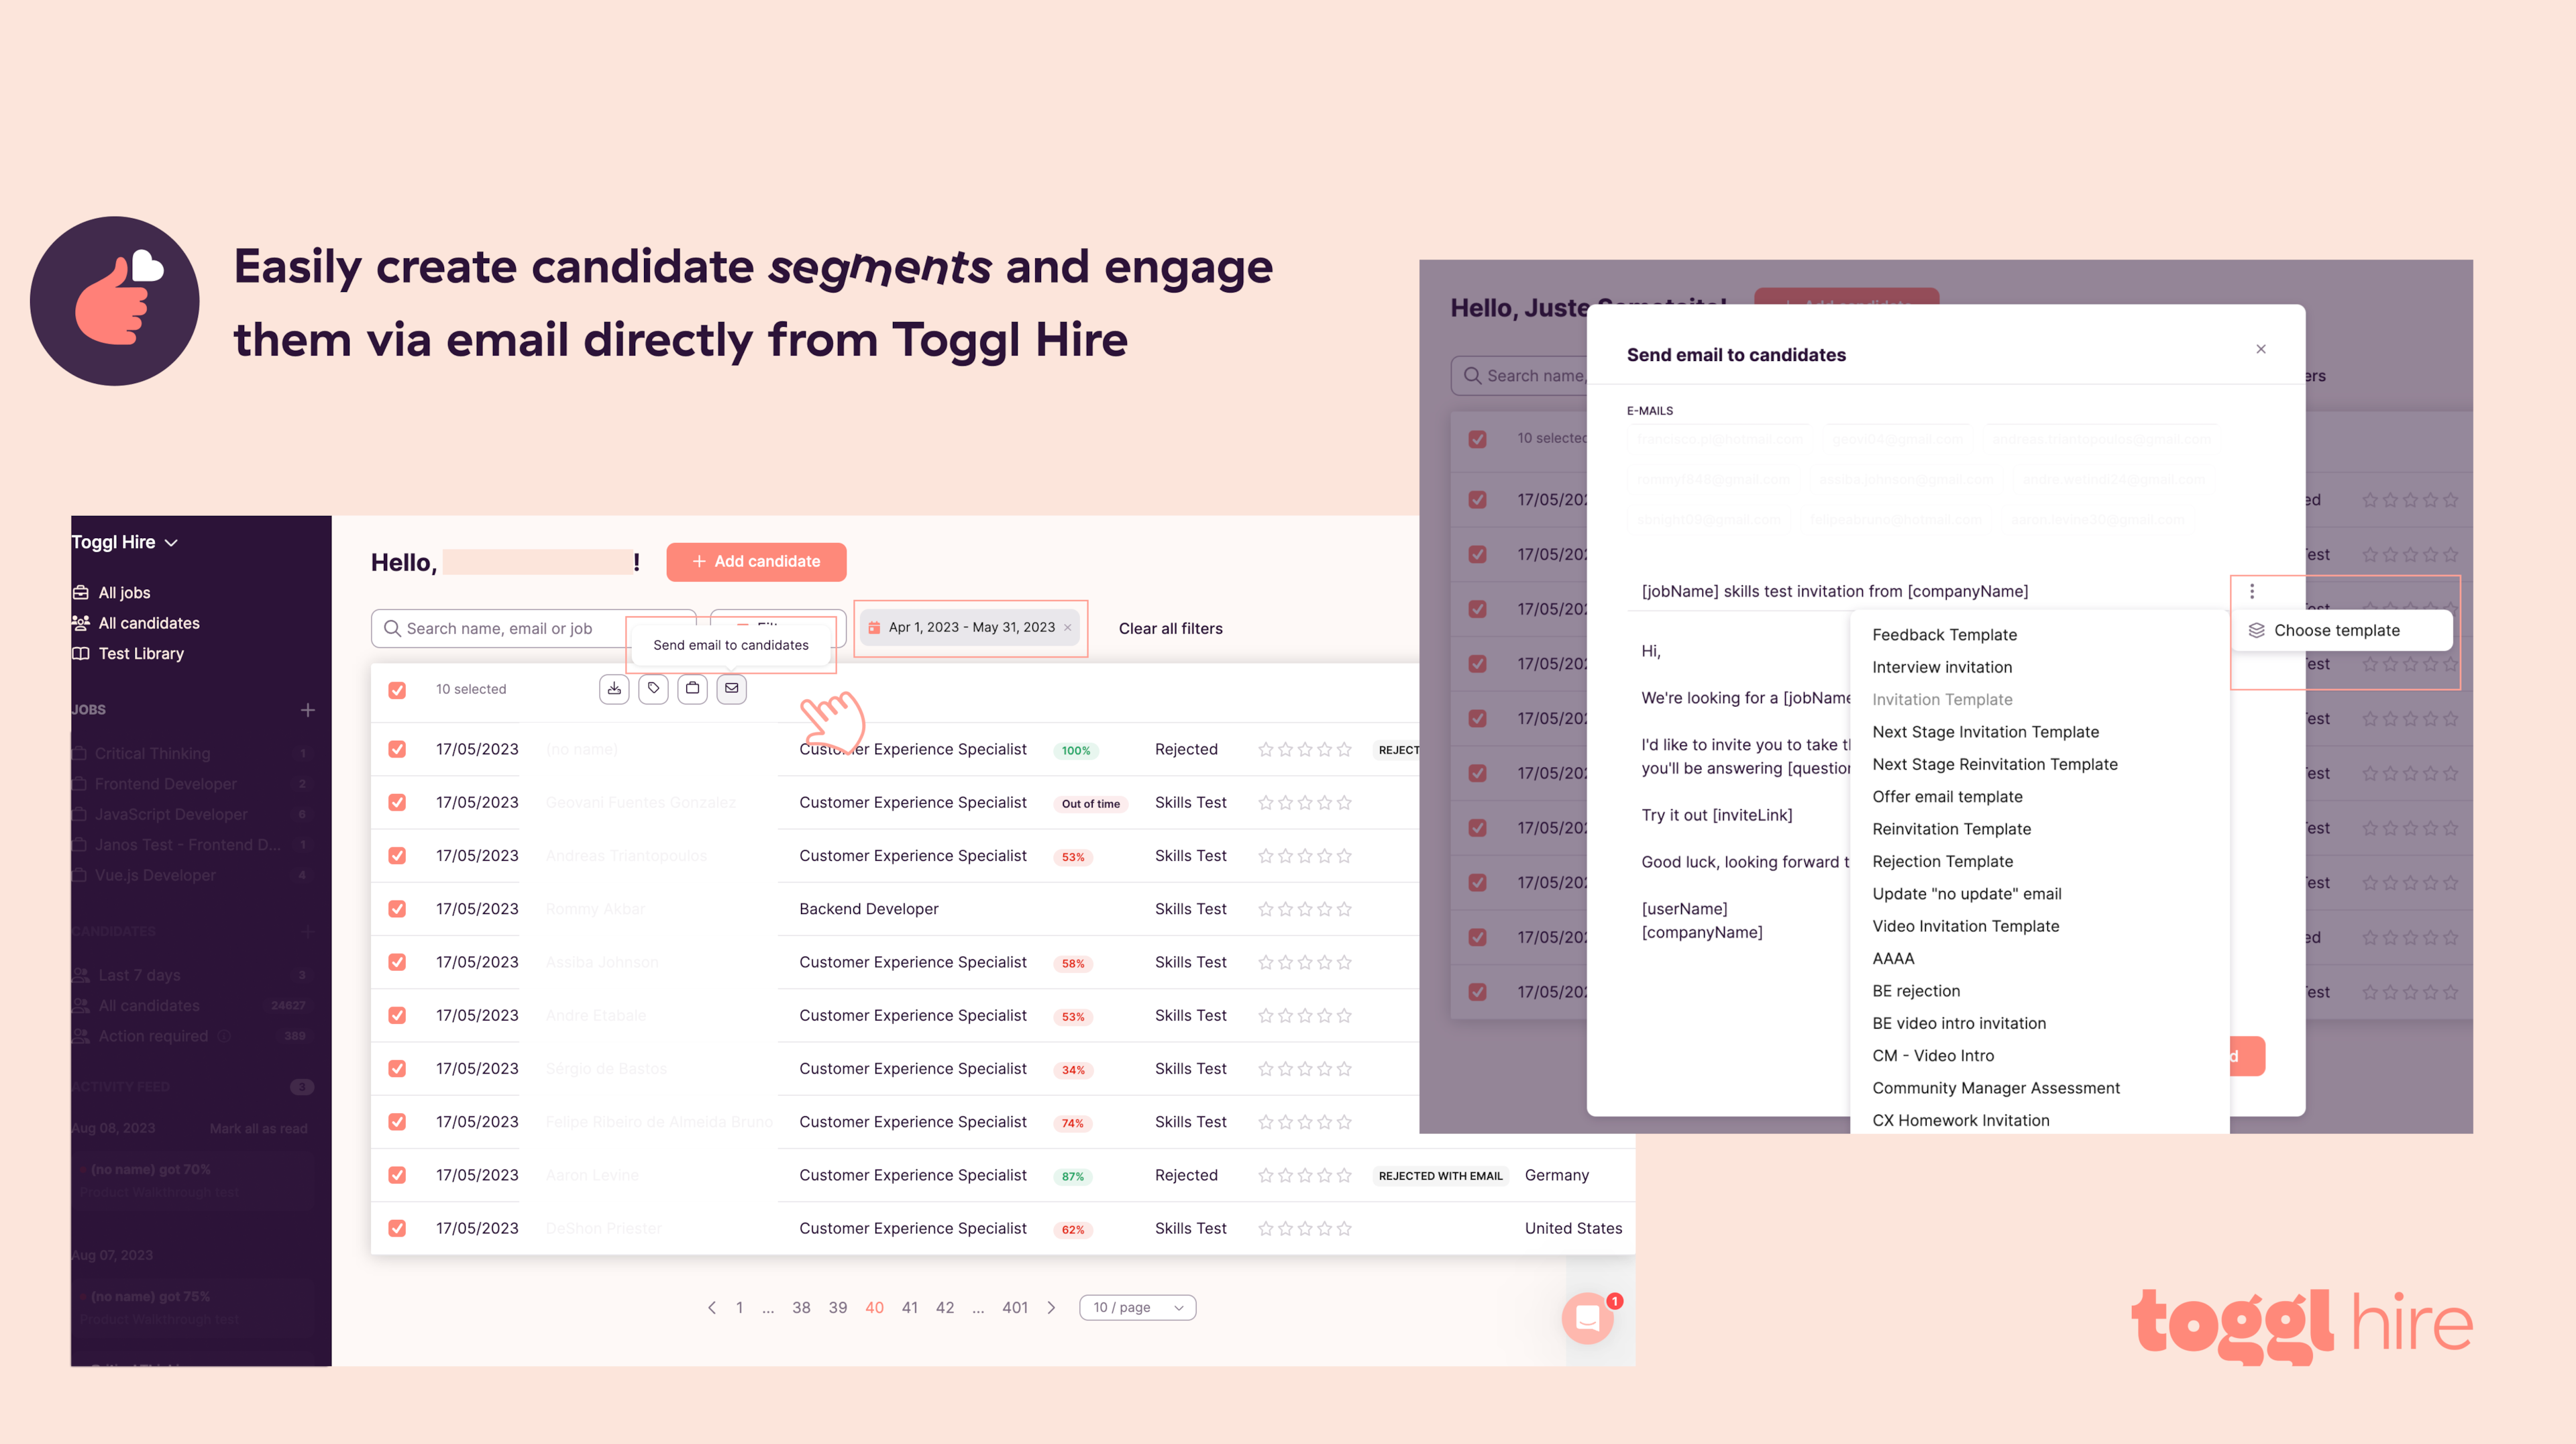 Build talent pools and engage your qualified candidates via Toggl Hire